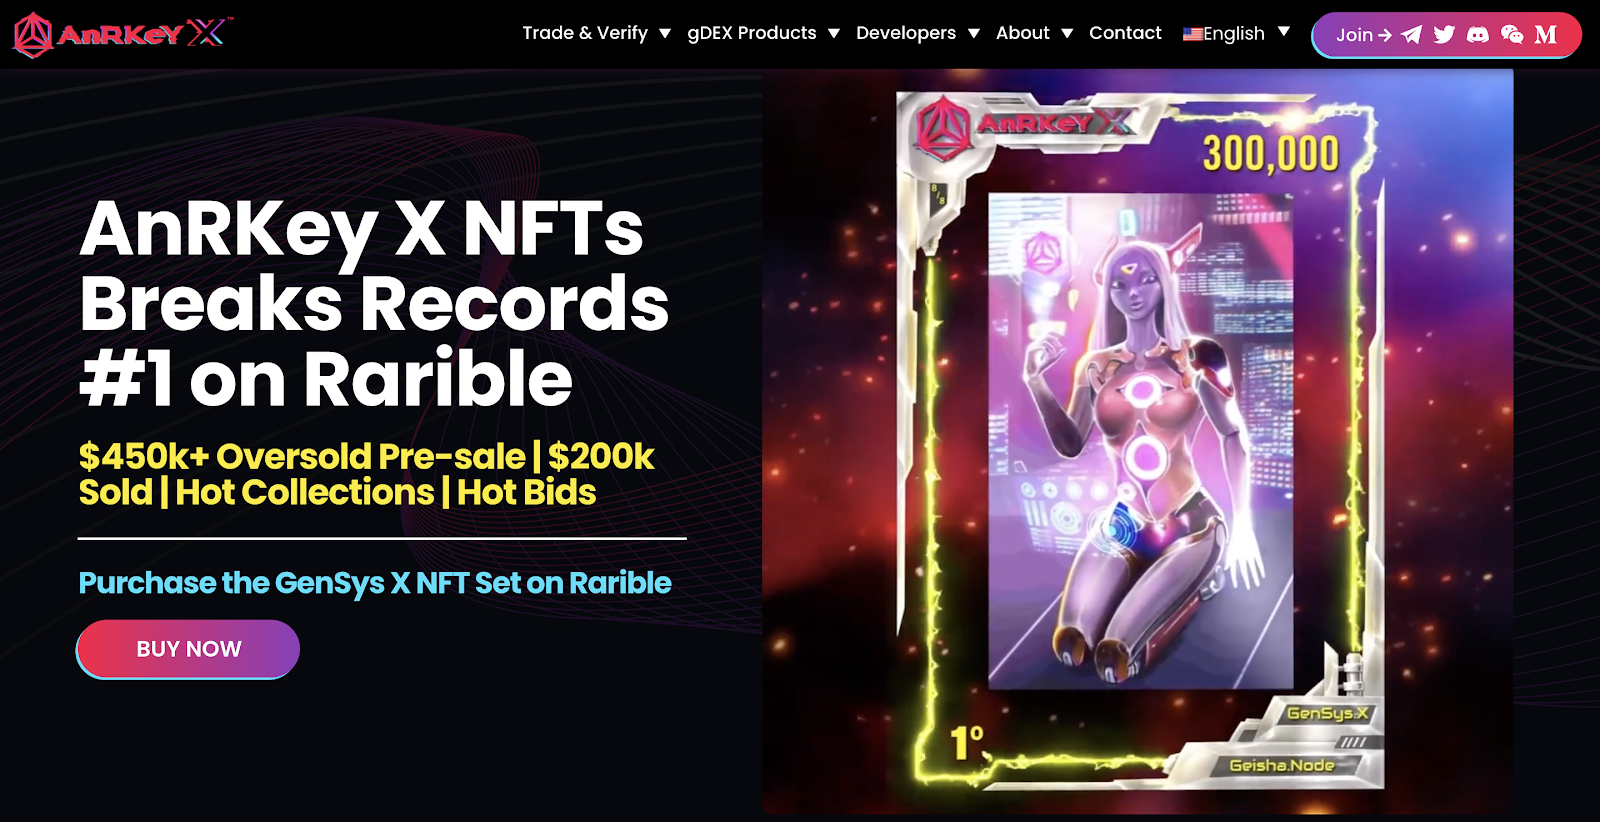 New NFT Drop Launches AnRKey X to #1 on Rarible